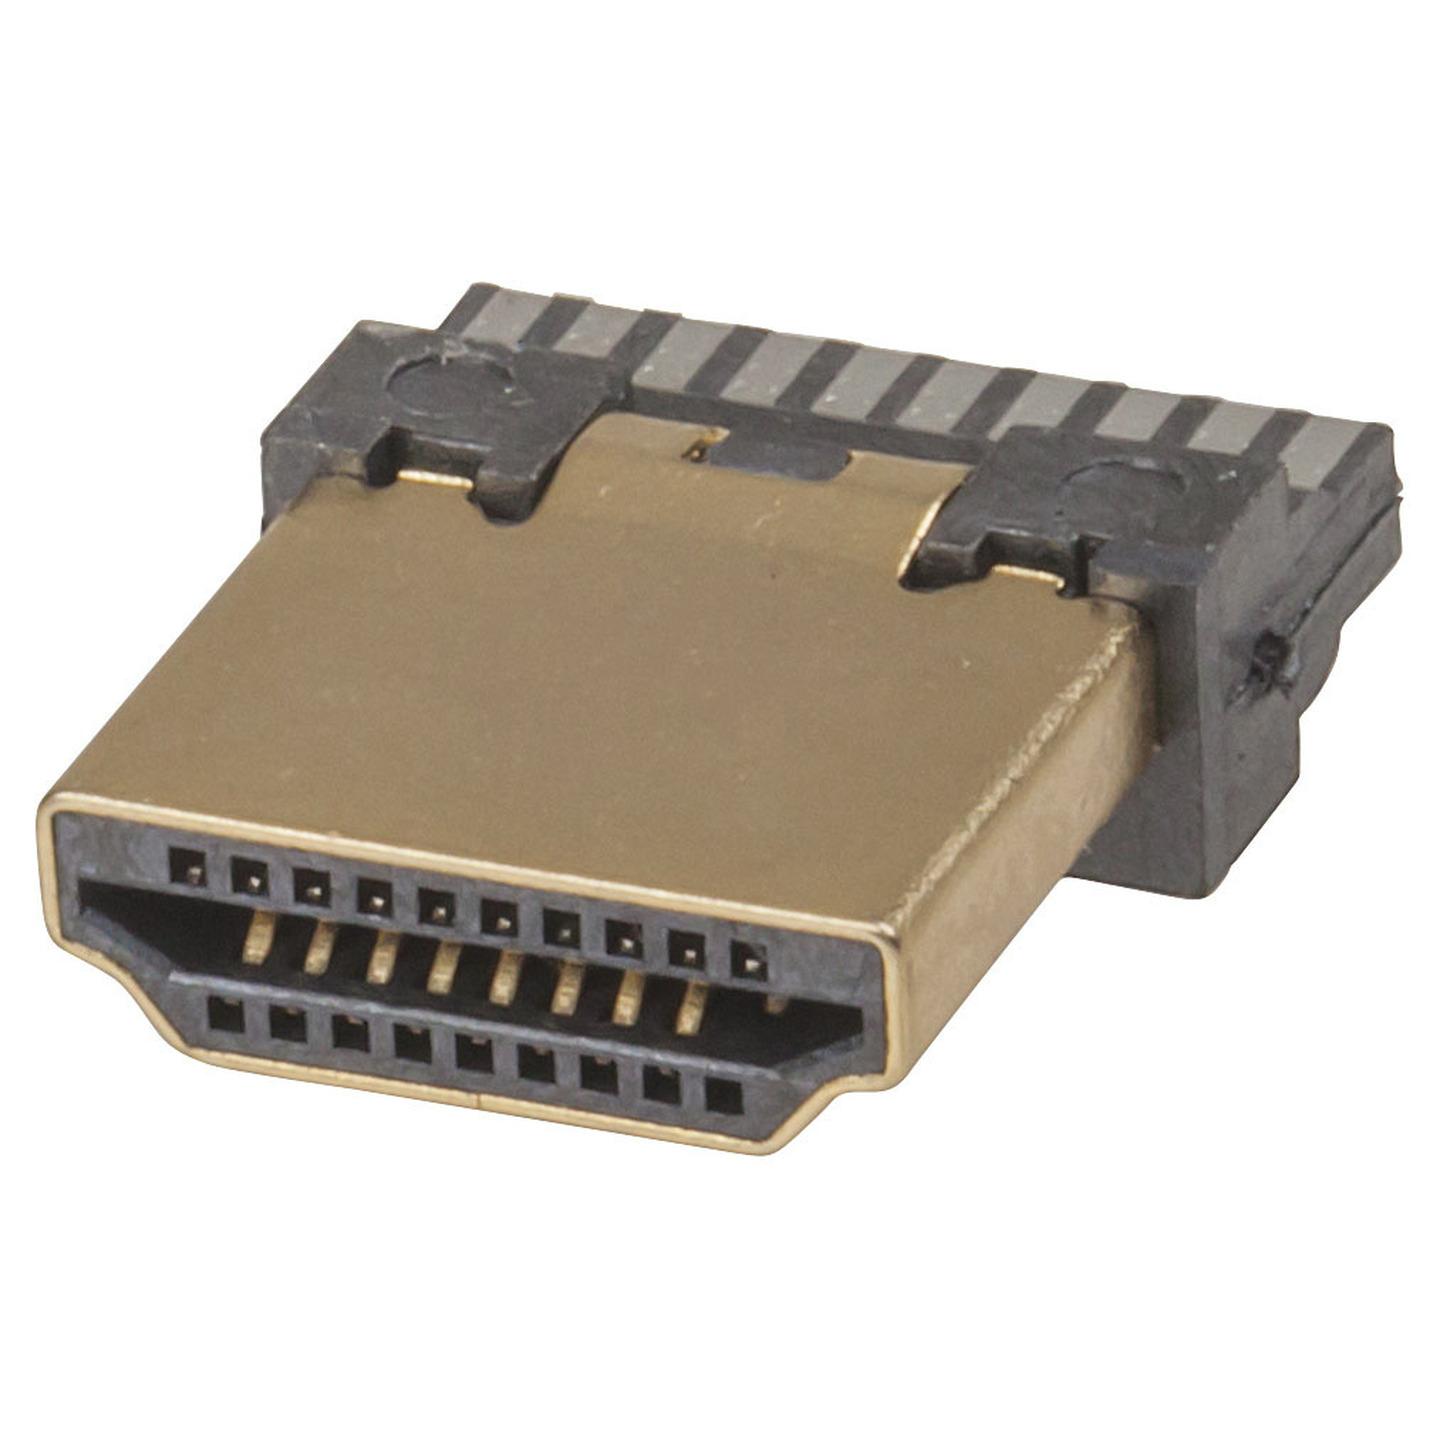 Gold Plated PCB Mount HDMI Plug